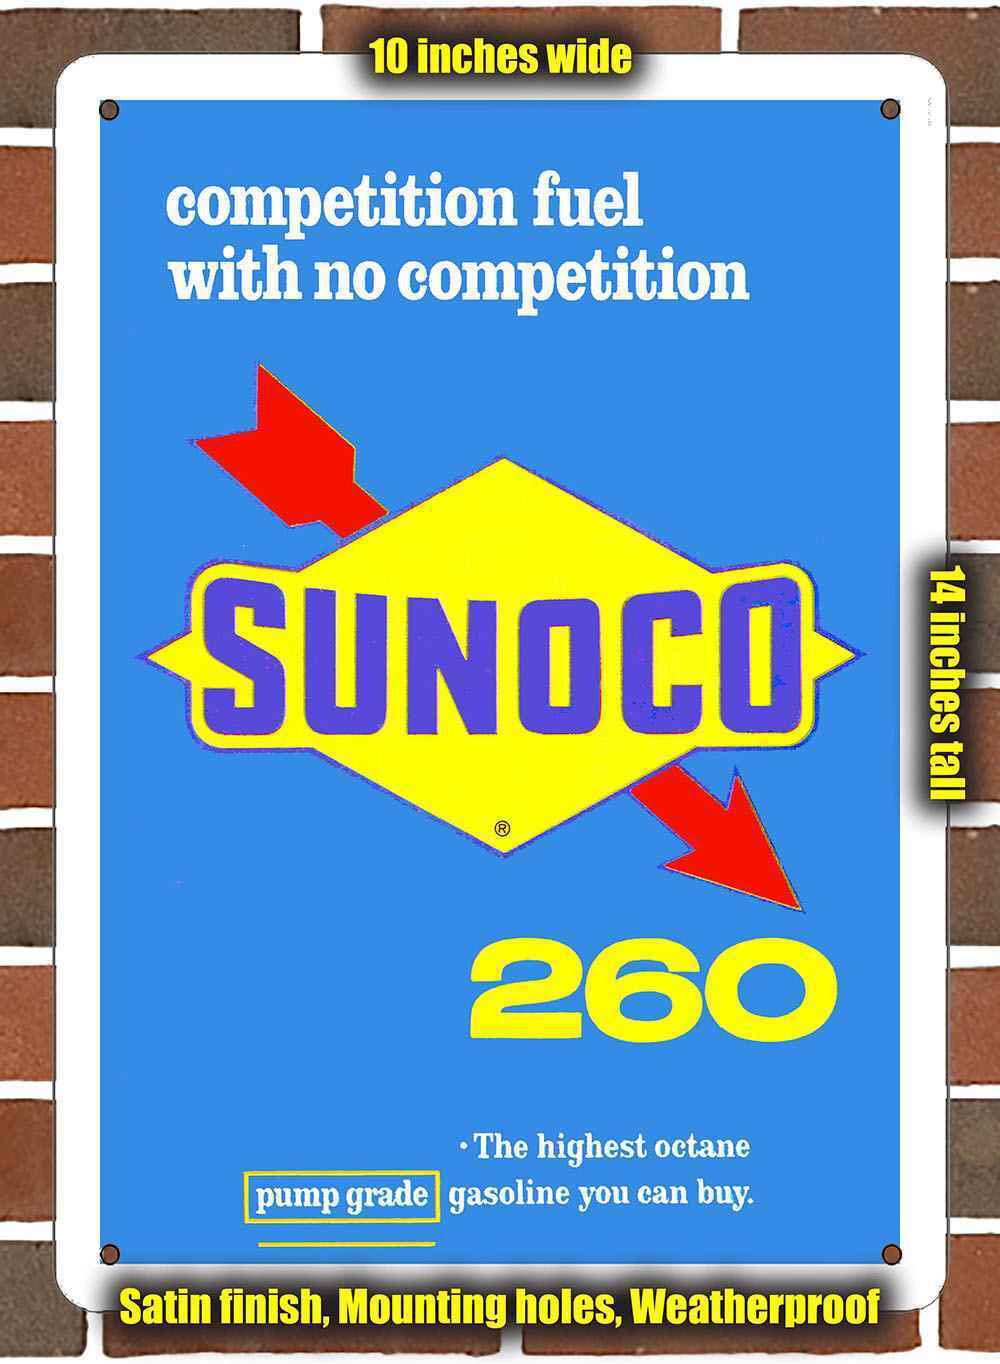 Metal Sign - 1966 Sunoco 260 Racing Fuel Highest Octane Gasoline- 10x14 inches